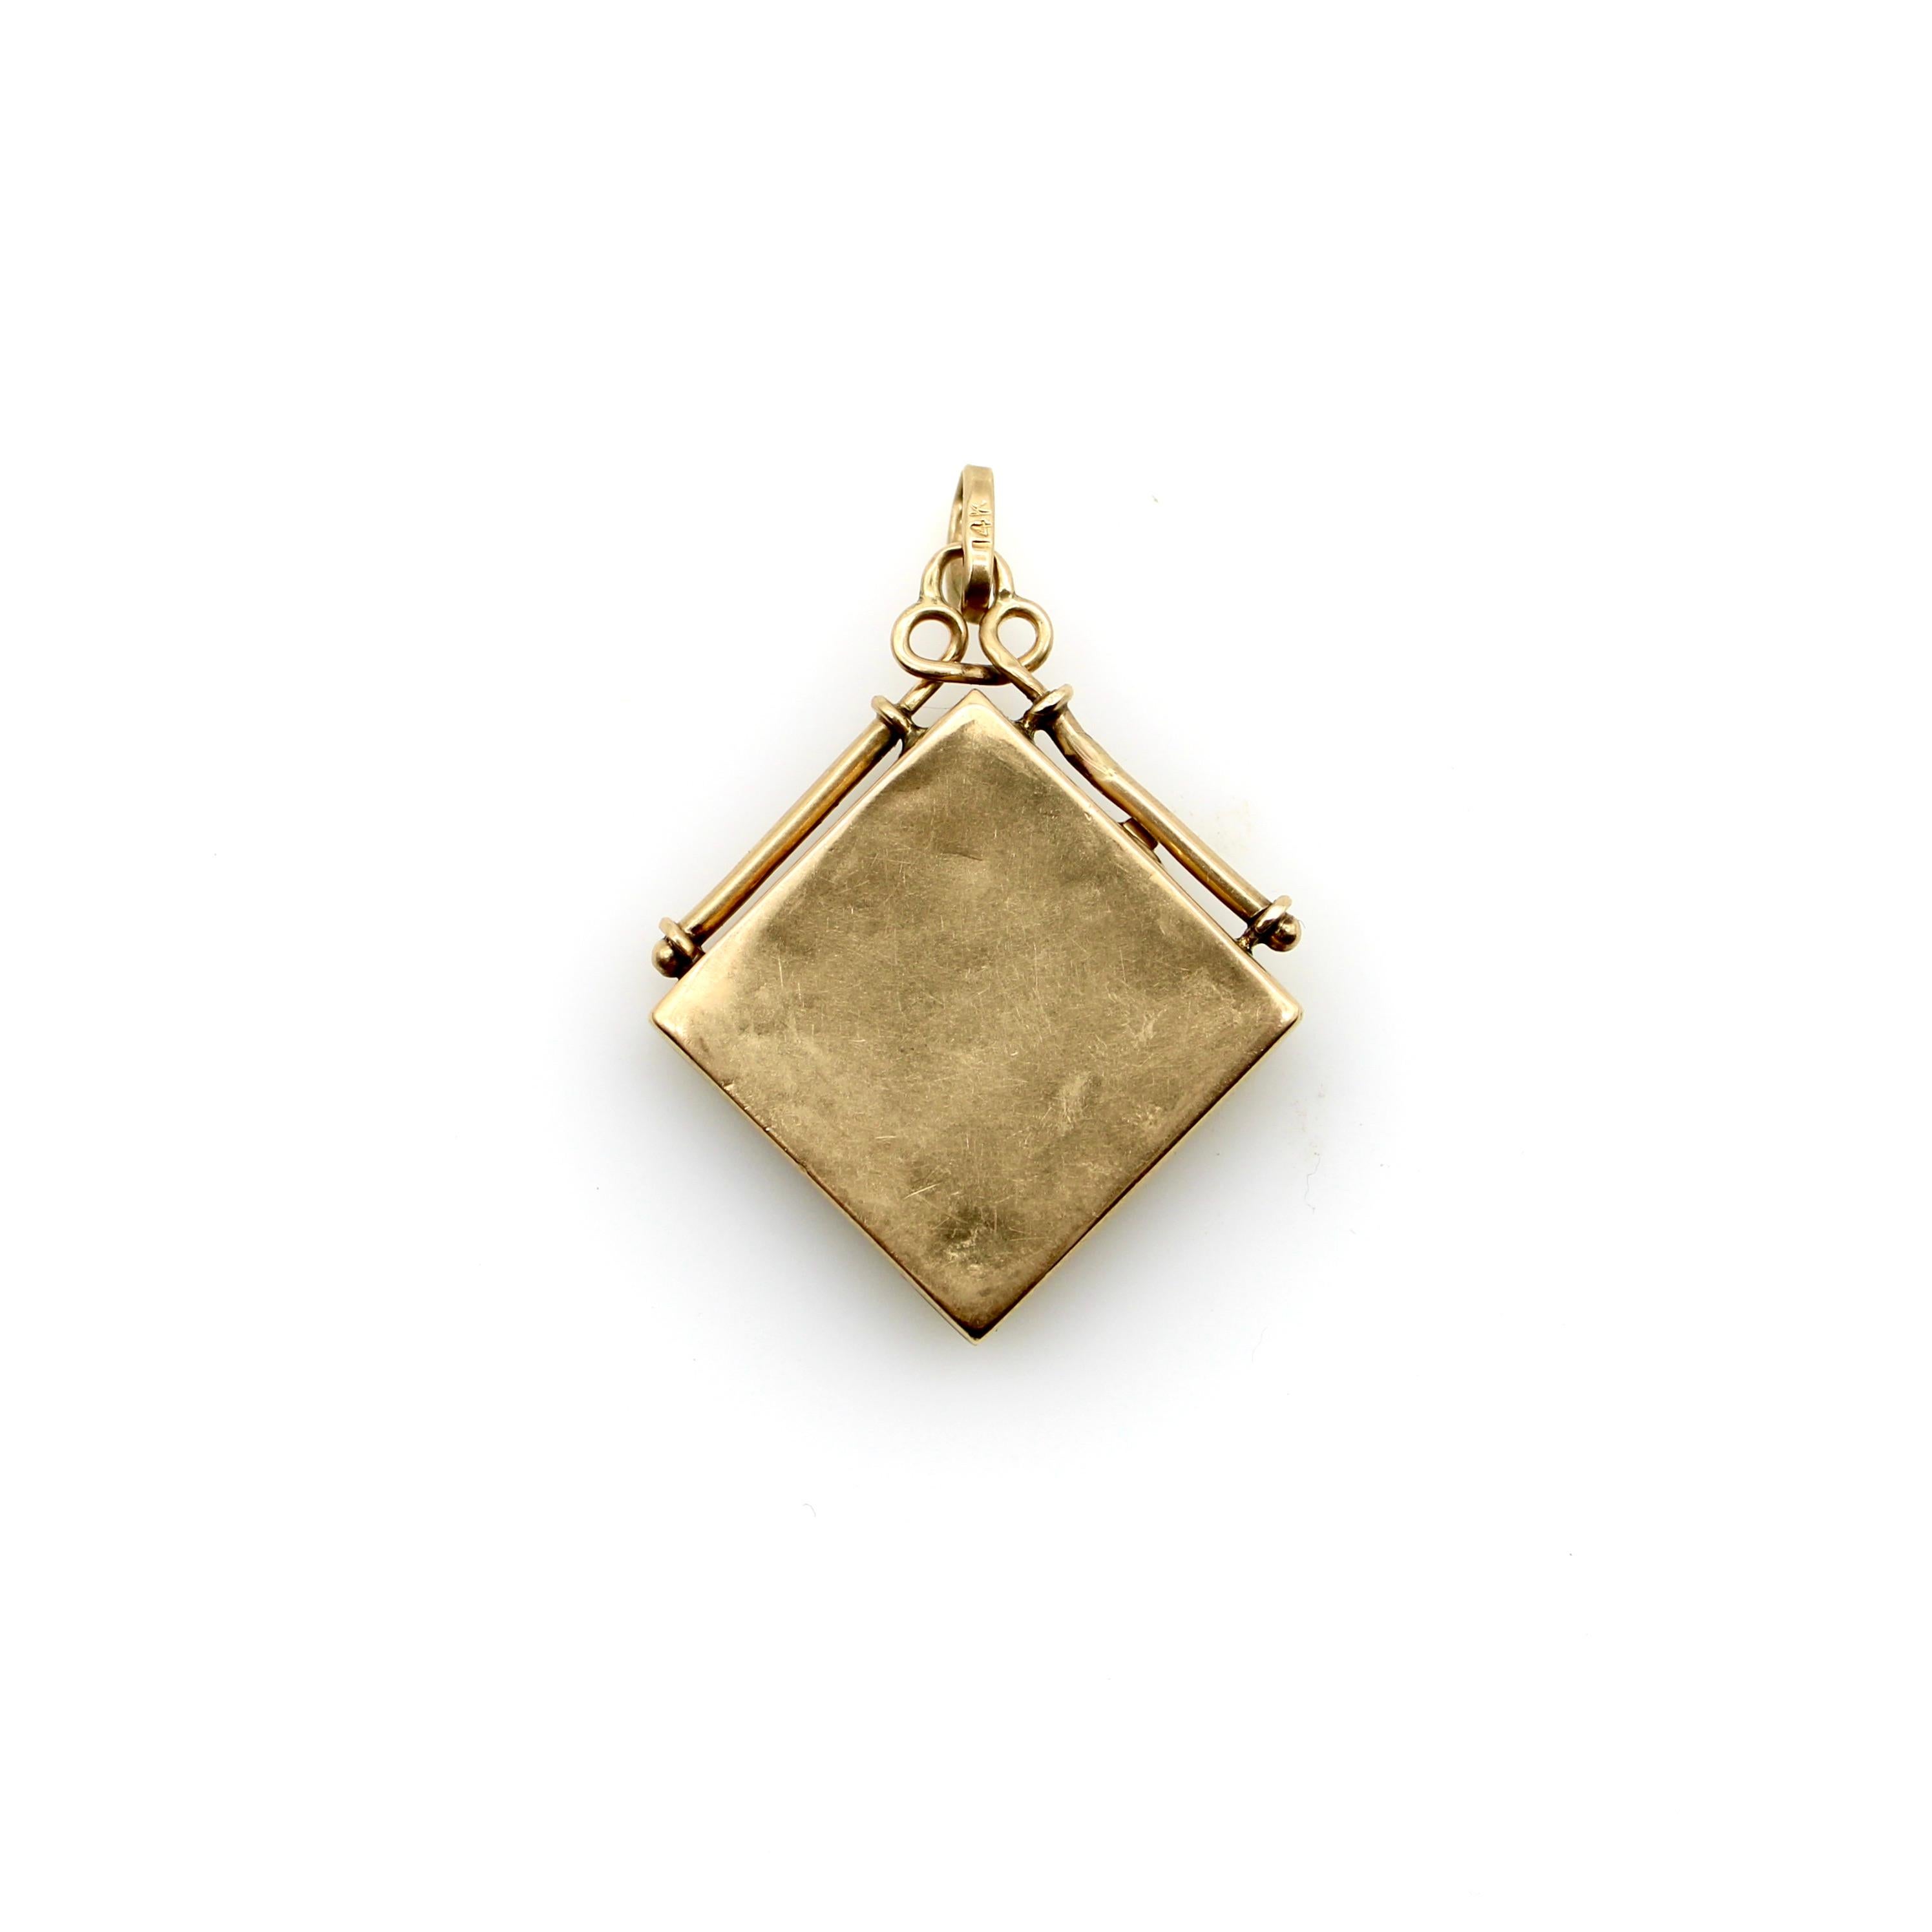 Women's or Men's 14K Gold Victorian Hand Engraved Square Fob Locket